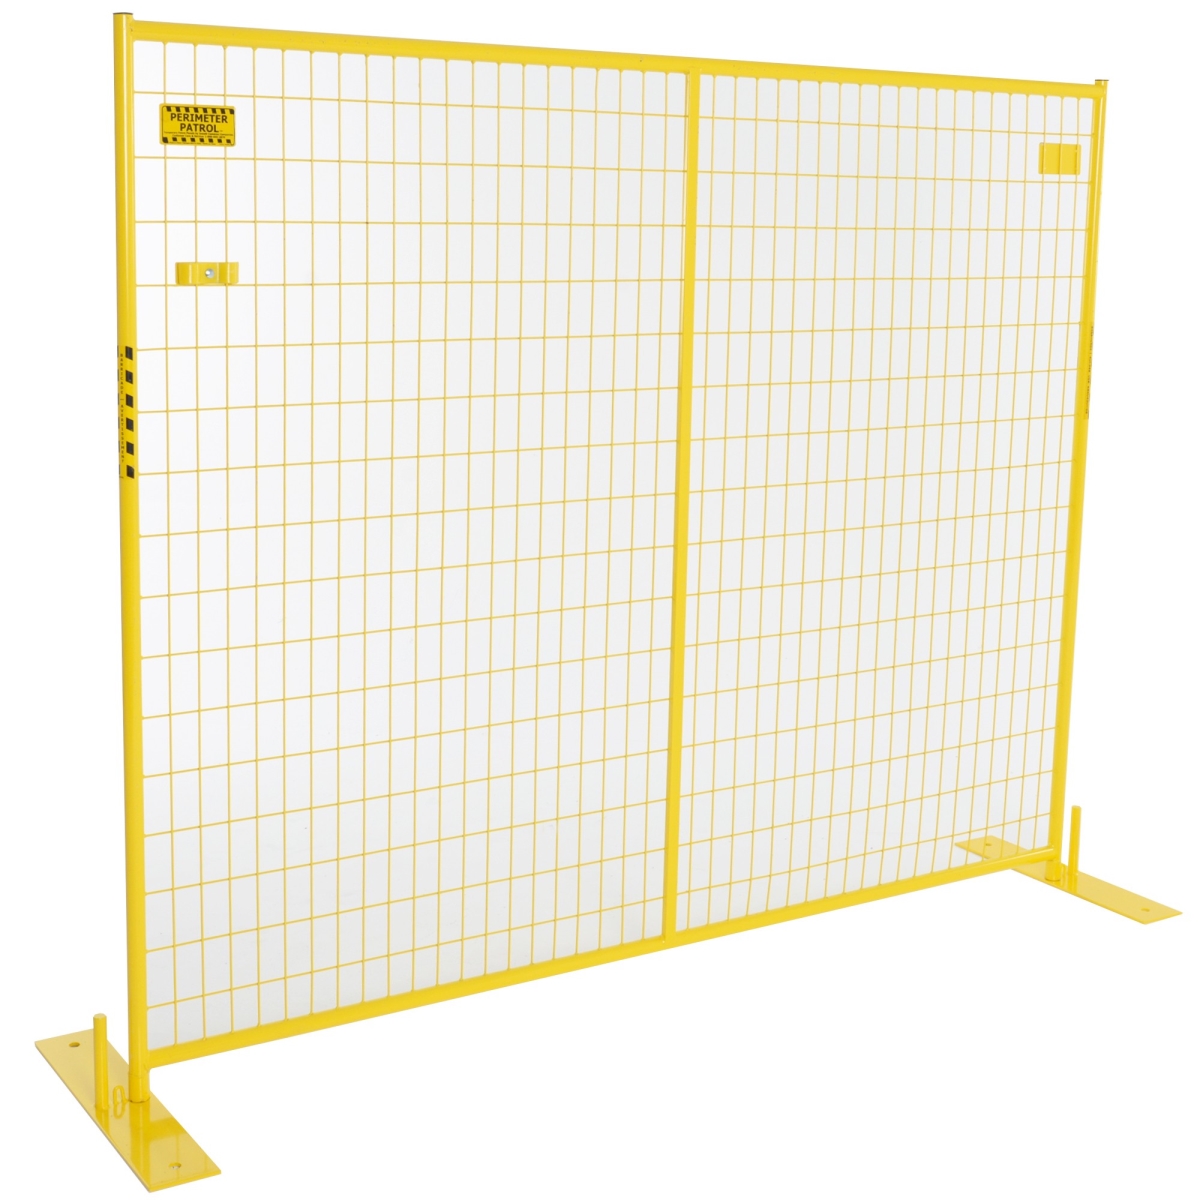 Picture of Jewett Cameron RF 10006 Perimeter Patrol Portable Security Panel with Clamp&#44; Yellow - 7 ft. 6 in. x 6 ft.